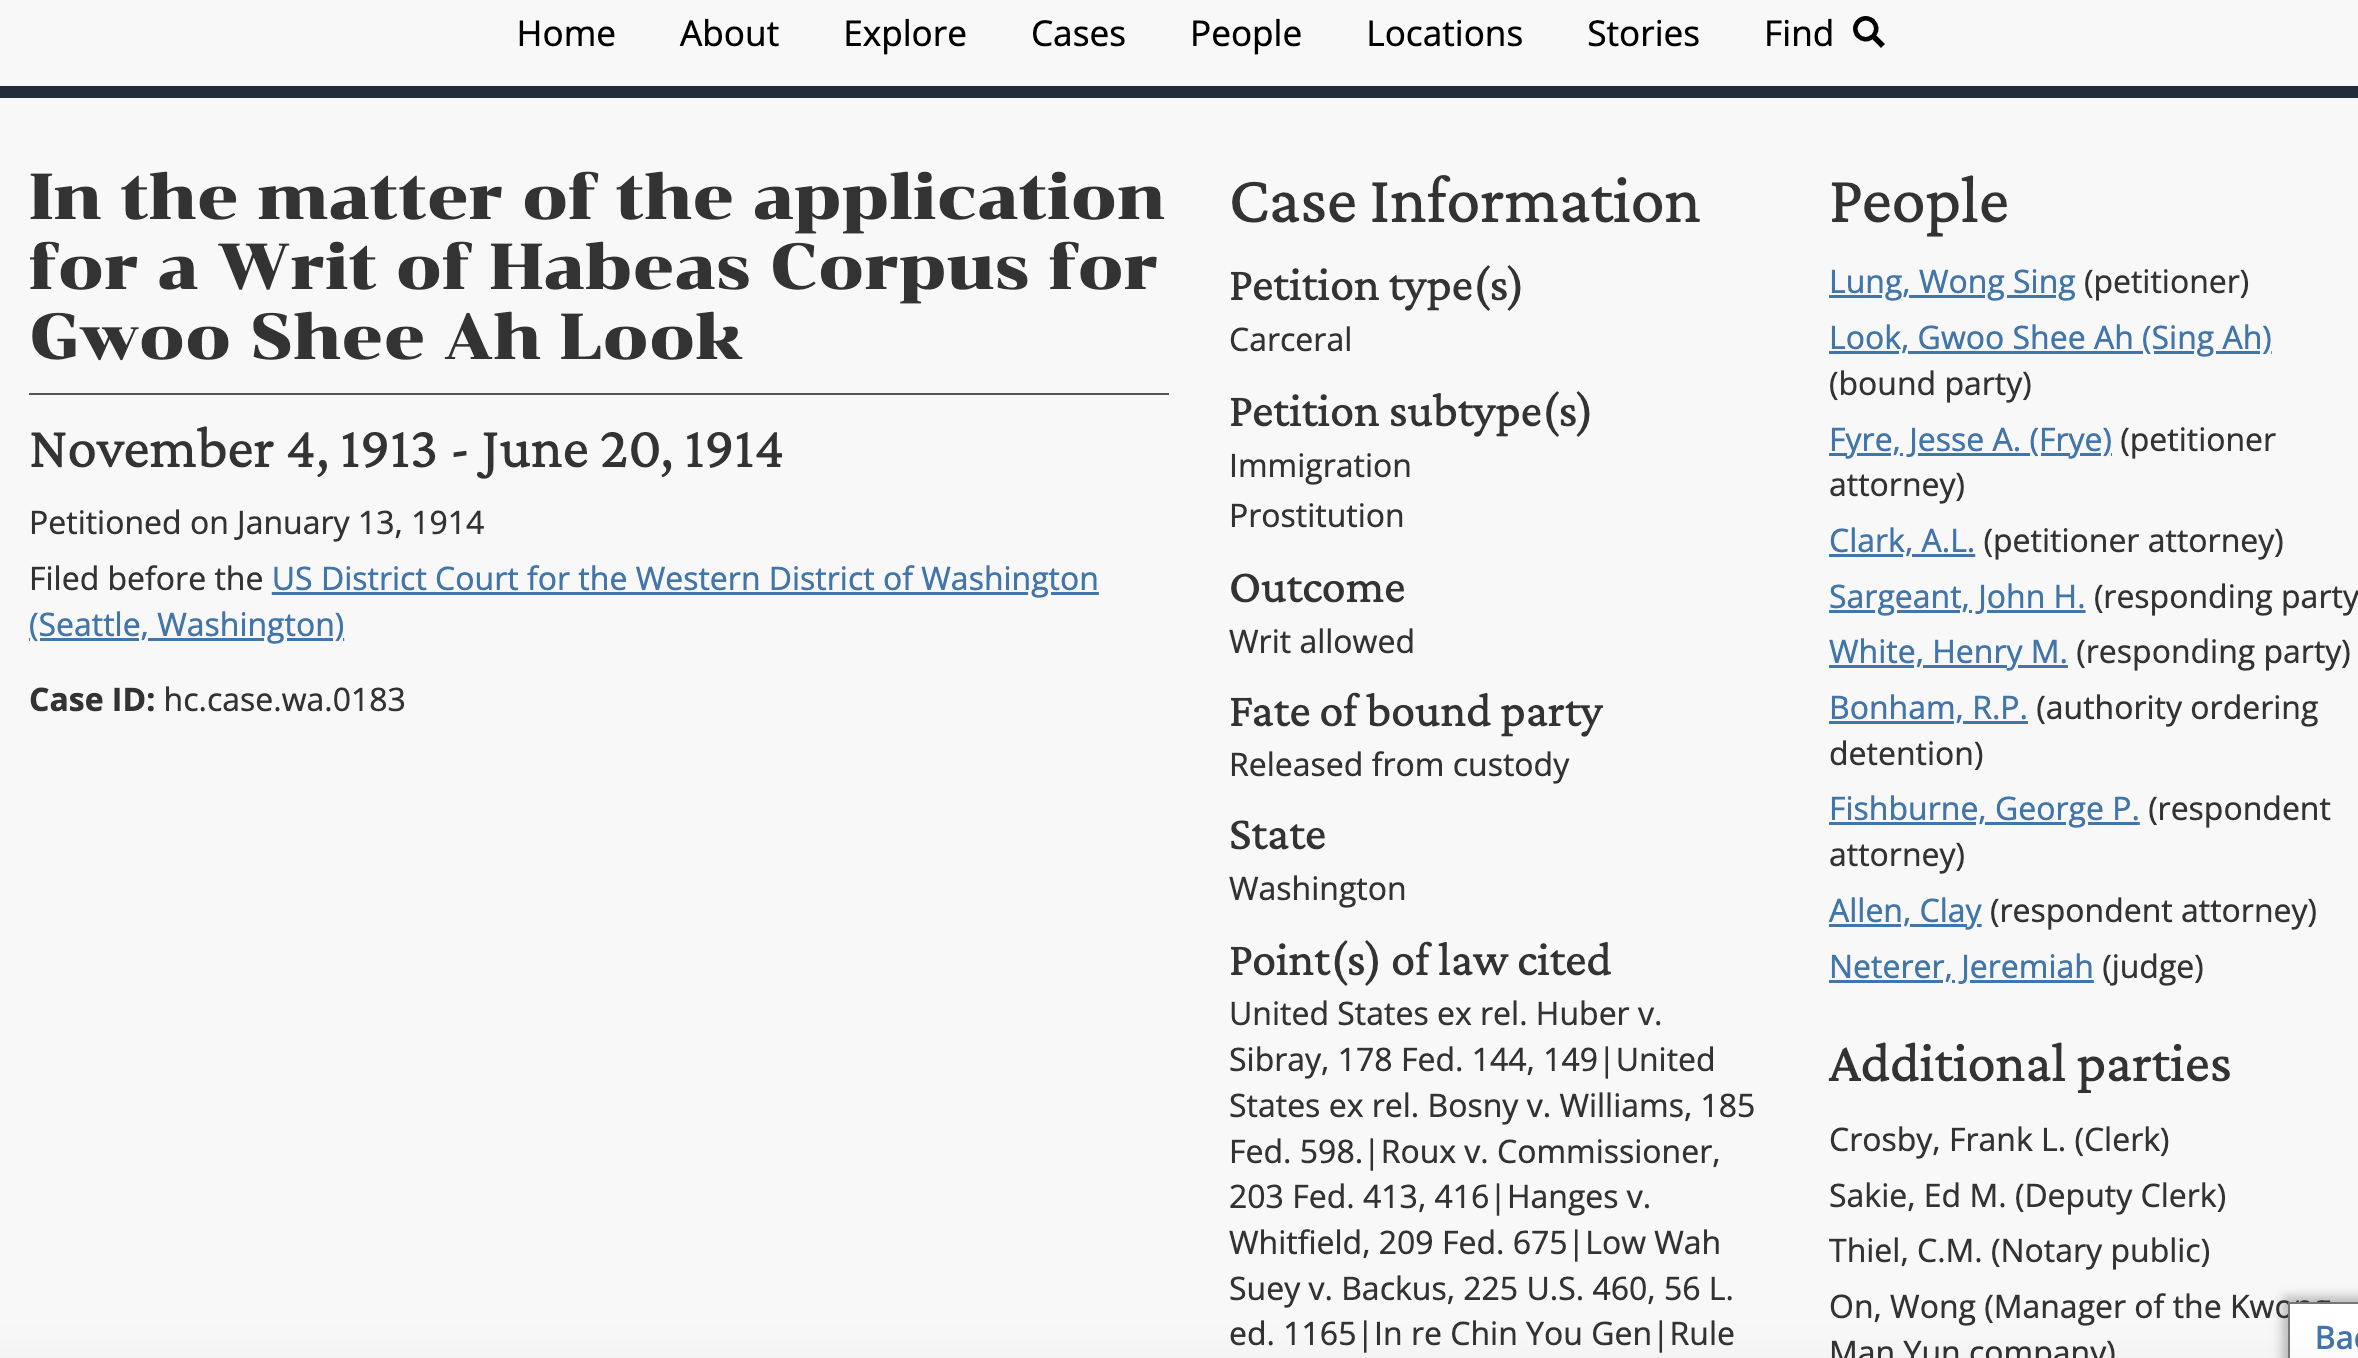 Petitioning for Freedom front end, displaying information about a habeas corpus case